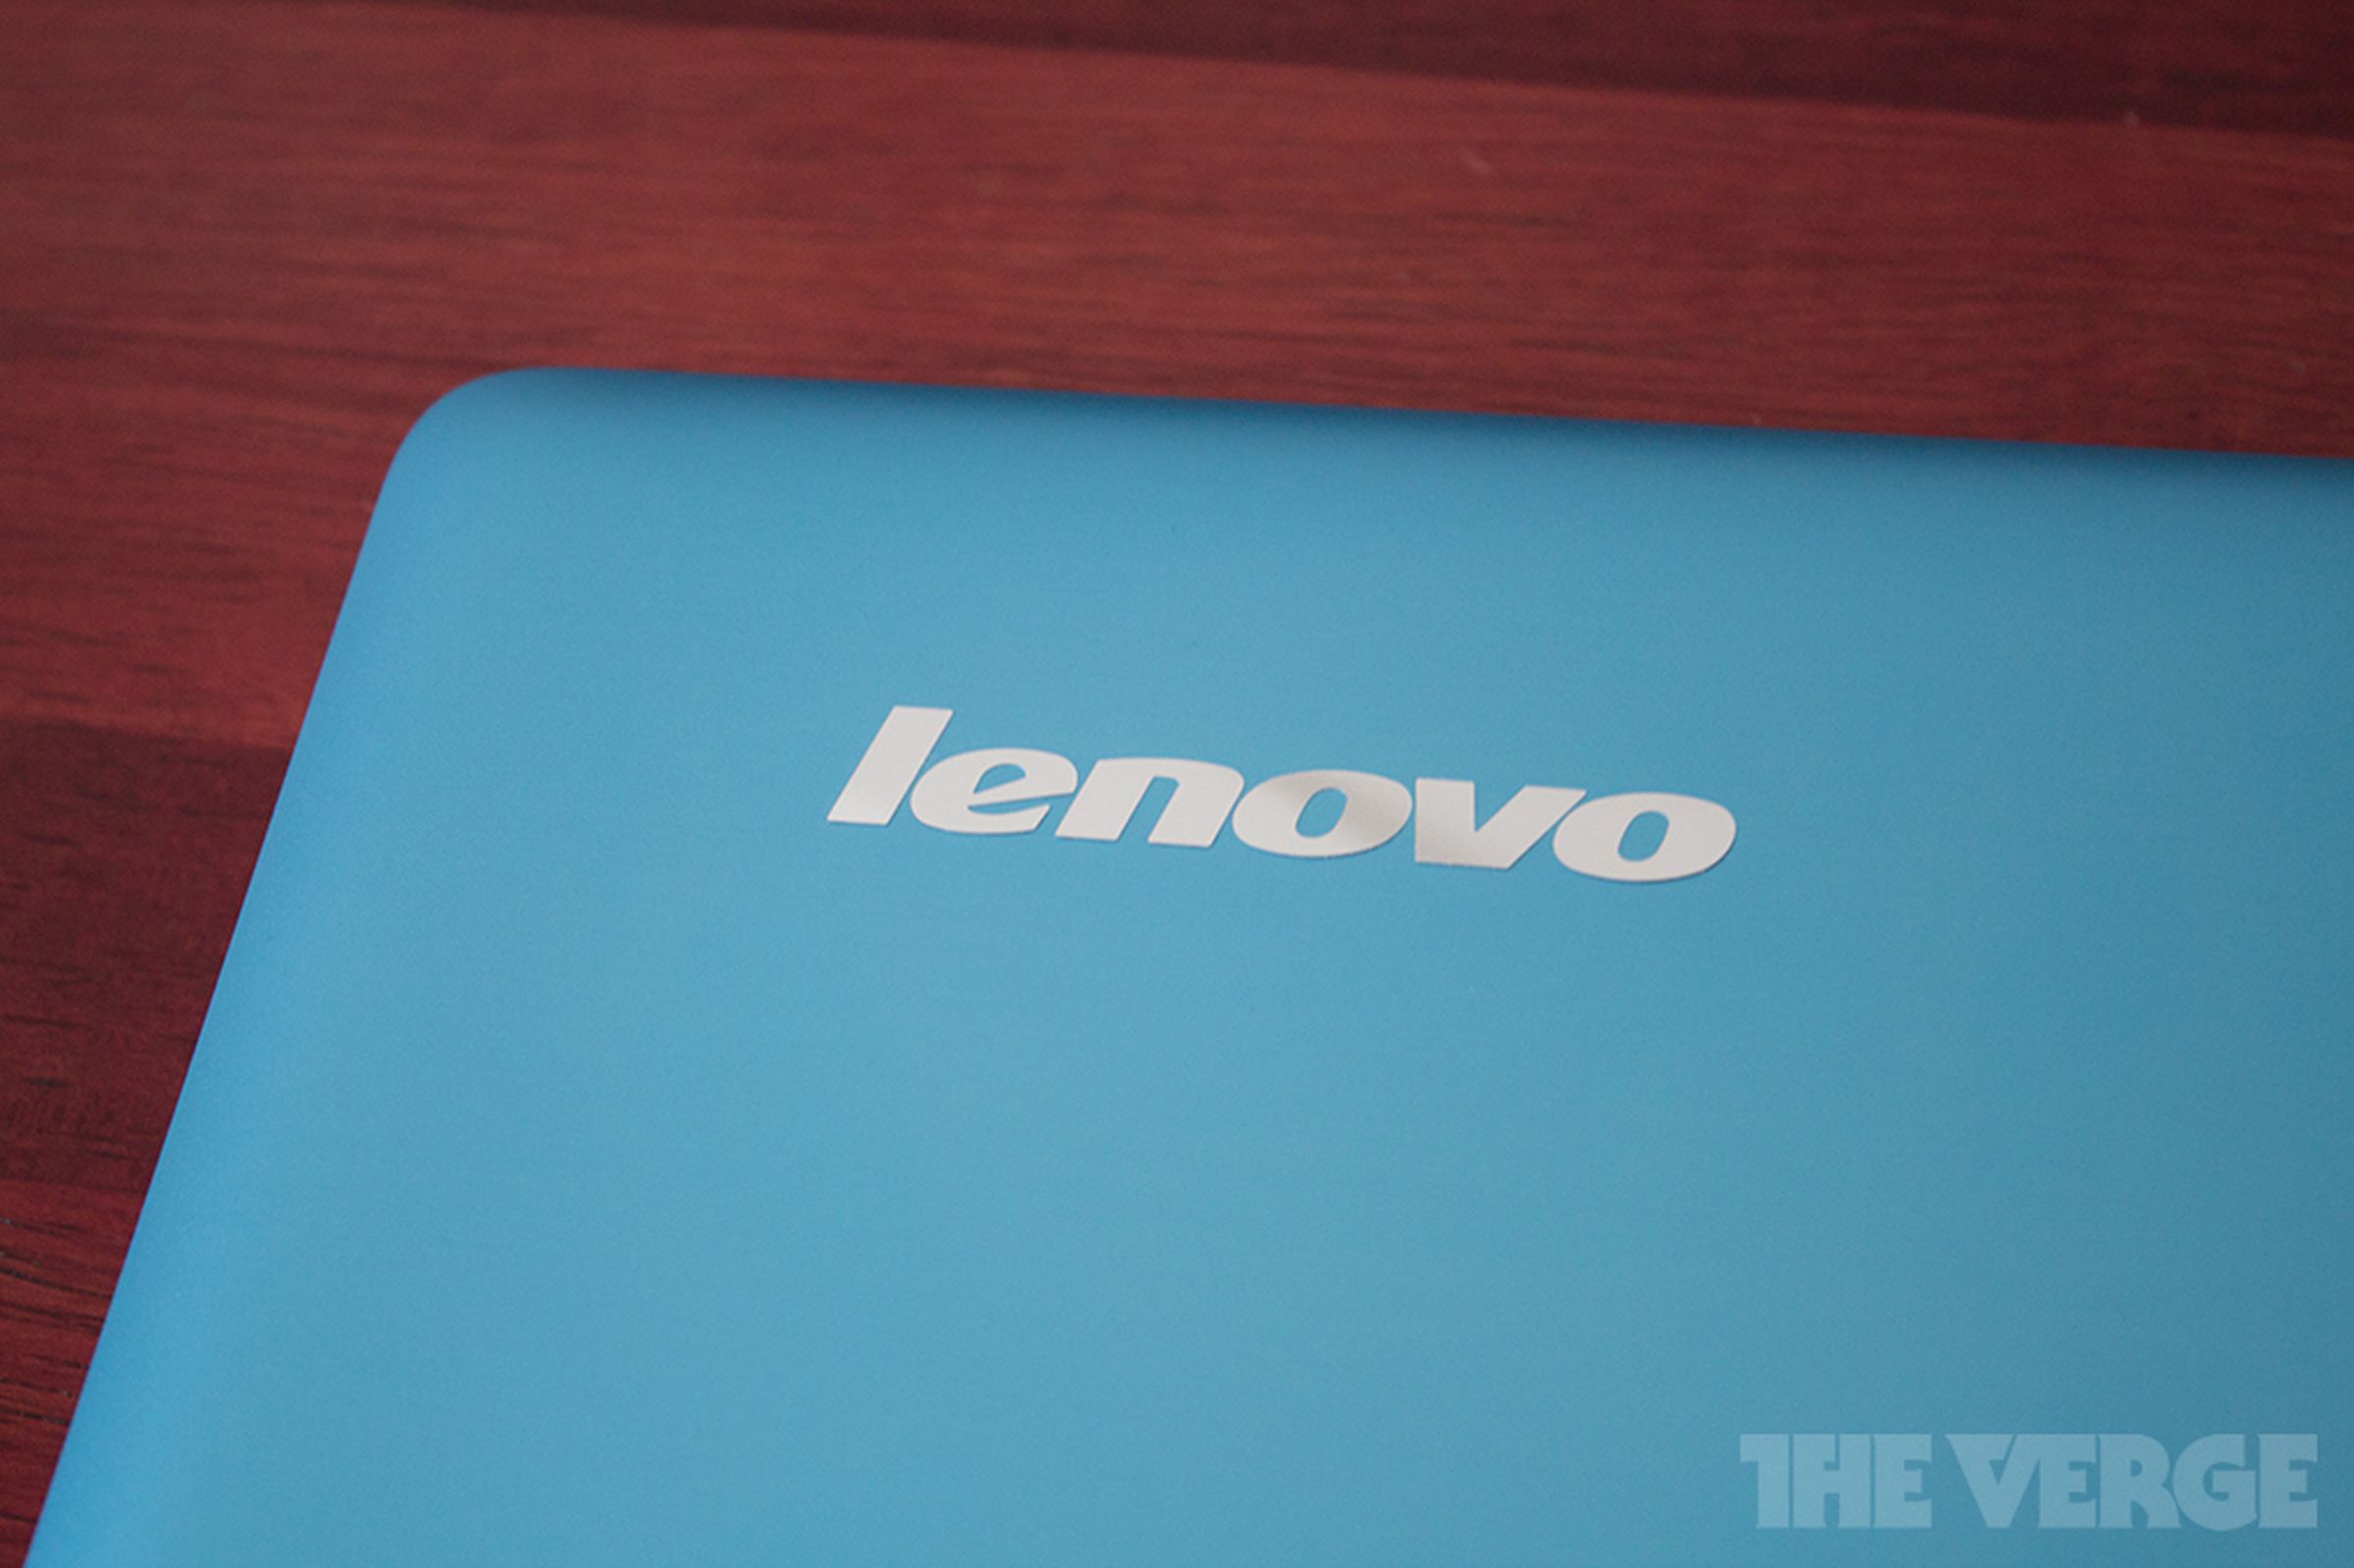 Lenovo IdeaPad U310 review pictures